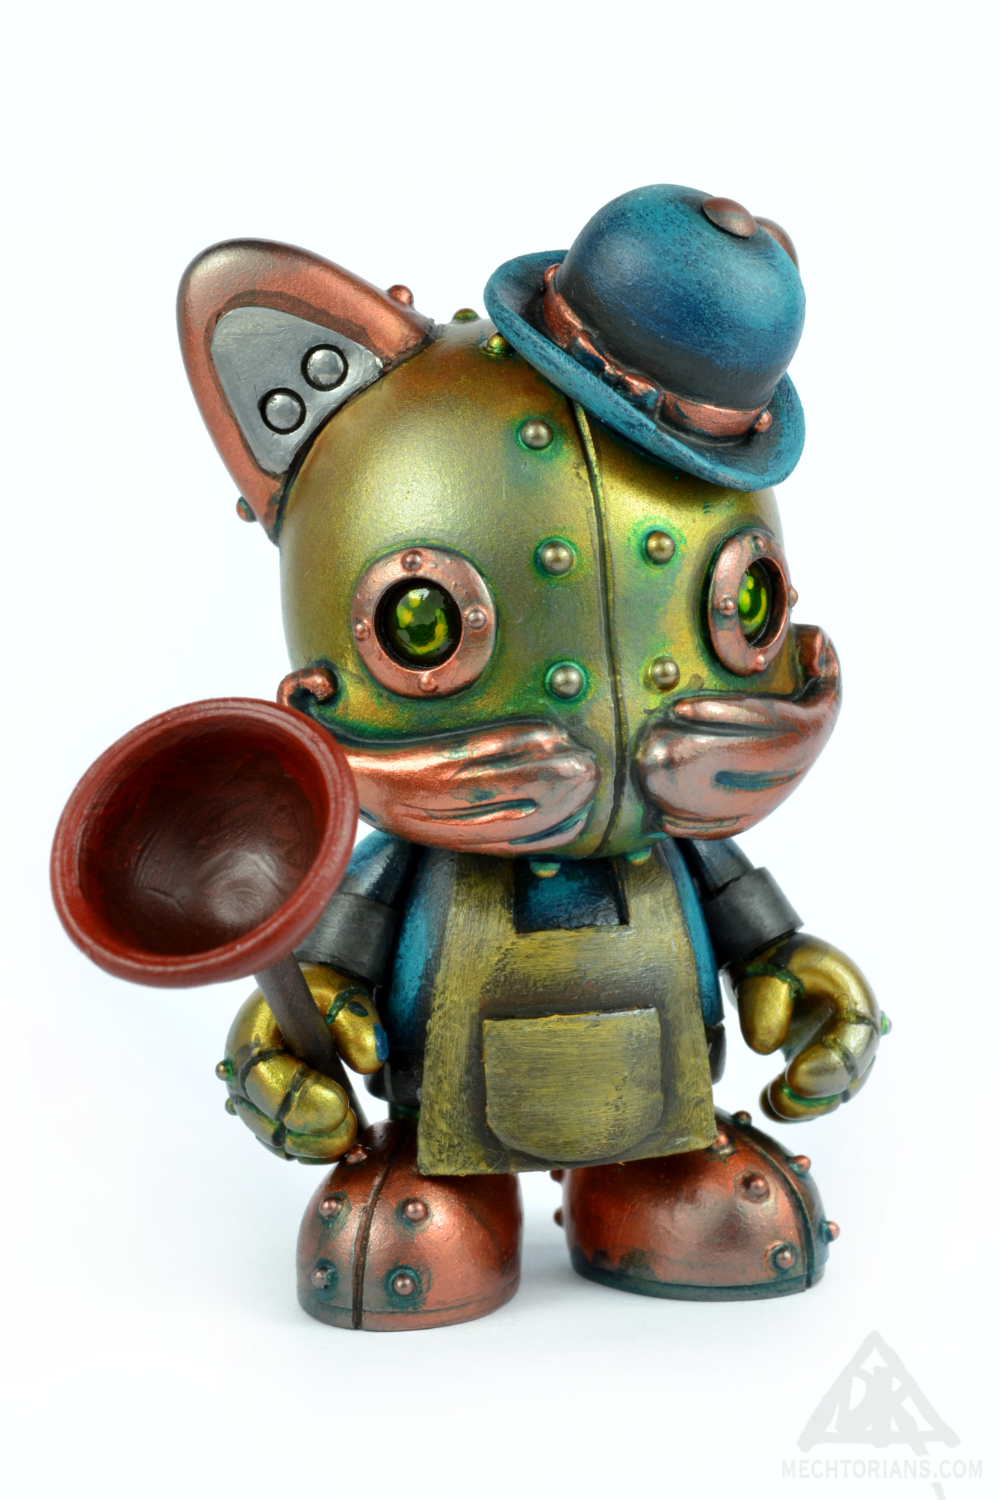 The Plumber. A Mechtorian Customised 3" Janky toy by Doktor A. Bruce Whistlecraft.